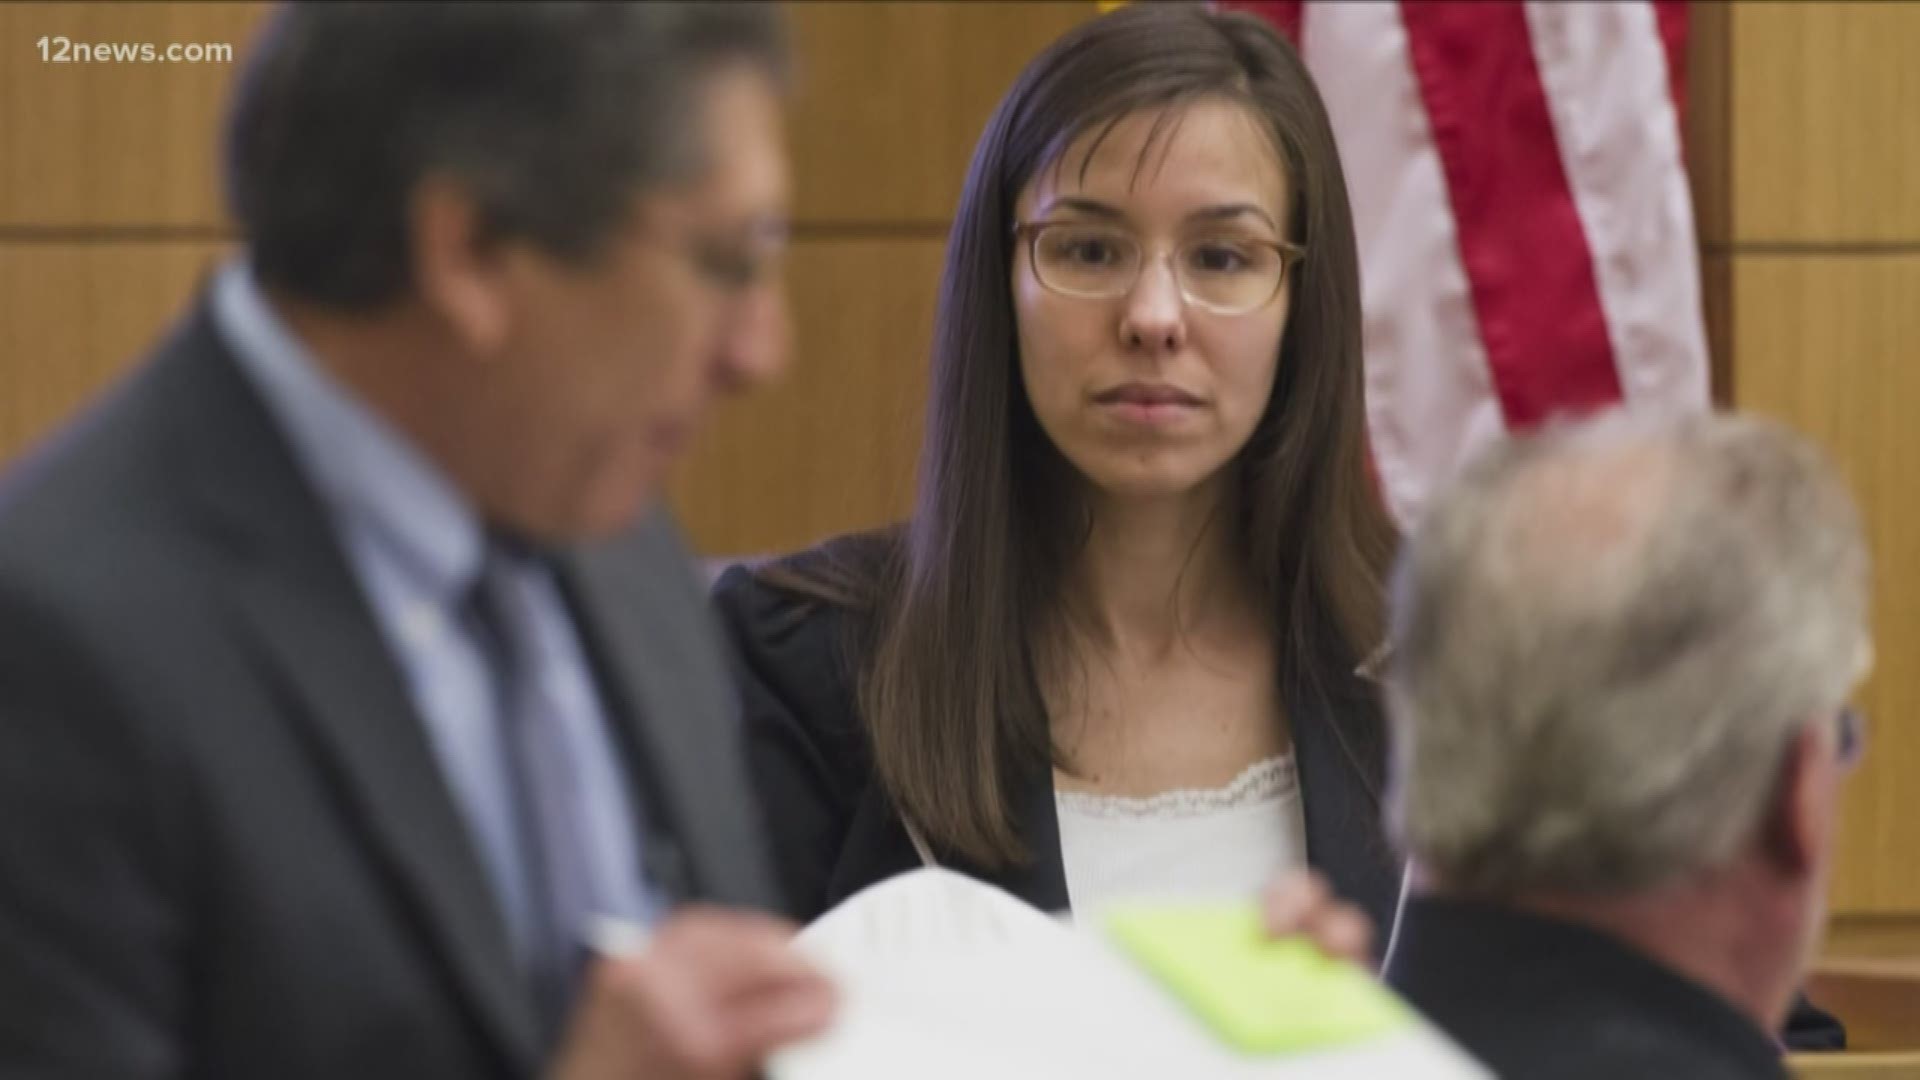 Arias' lawyers say the trial was mismanaged and slanted against Jodi Arias that they want the verdict tossed. The 3 justices didn't give either side an easy time.